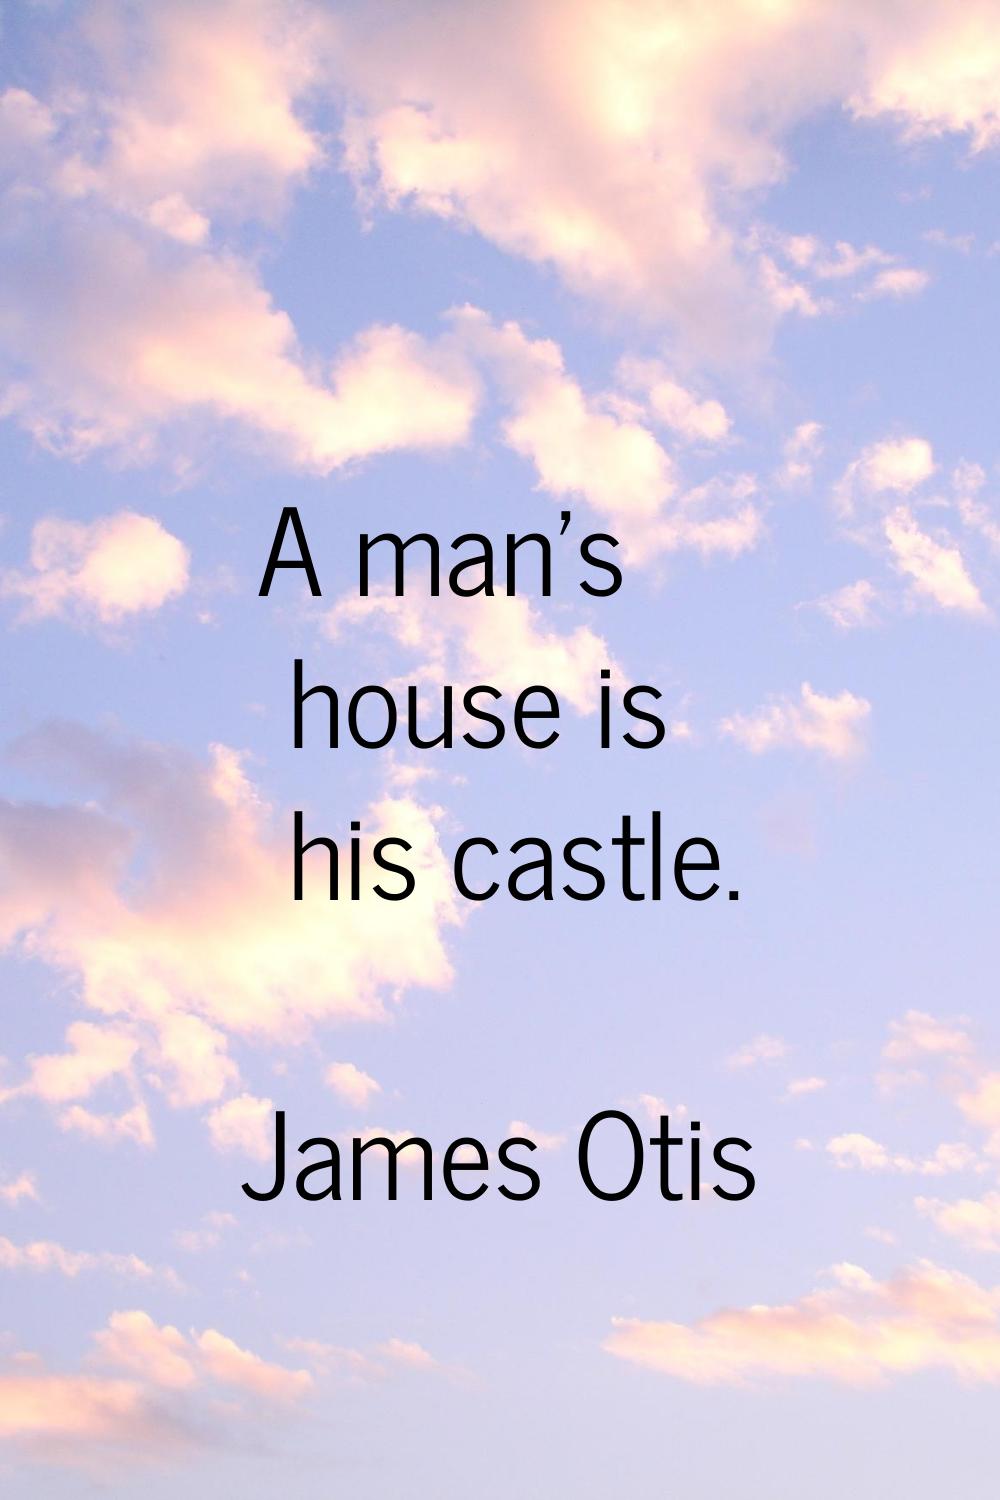 A man's house is his castle.